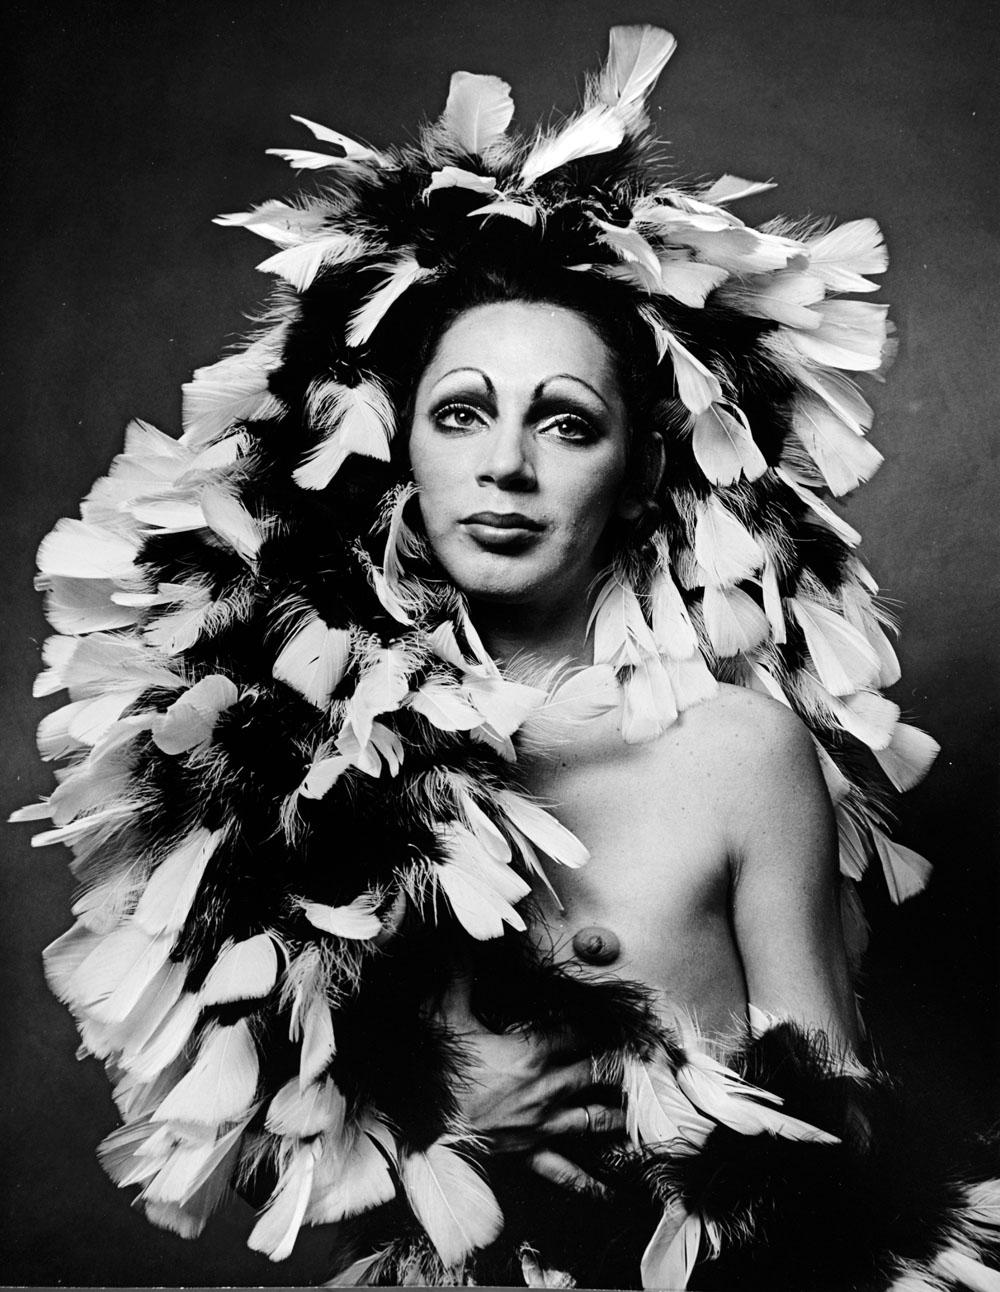 Jack Mitchell Portrait Photograph - Warhol Superstar Holly Woodlawn Signed